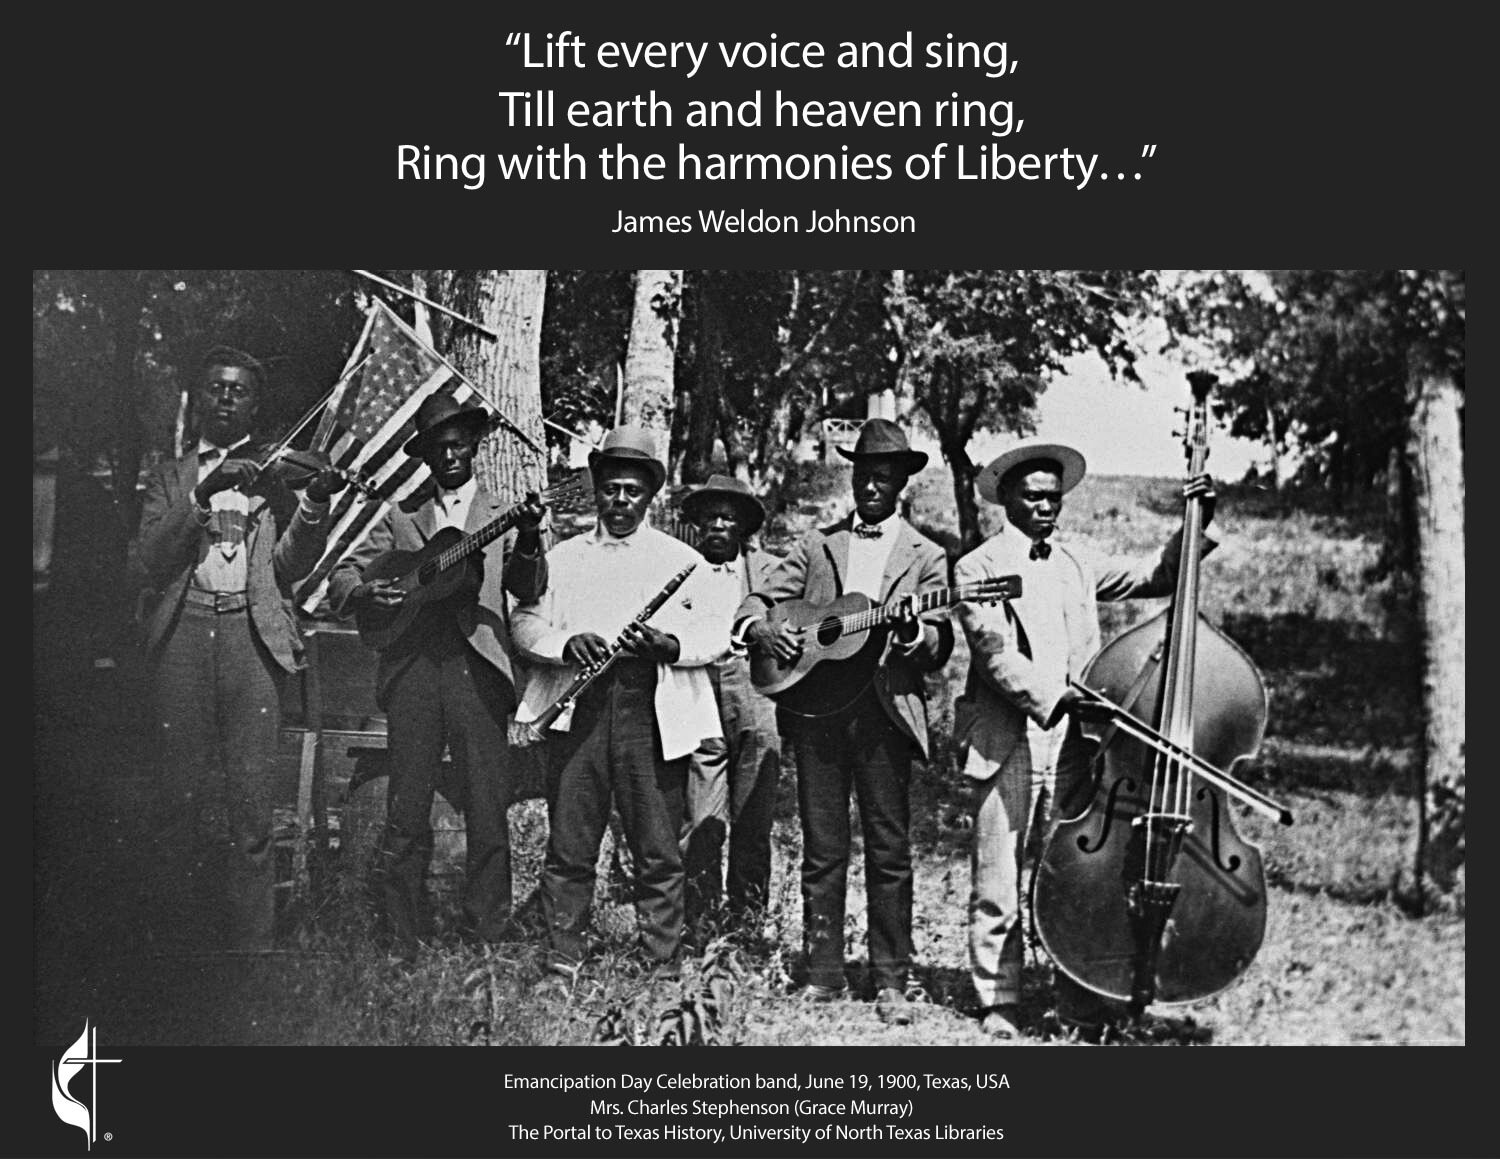 Emancipation Day Celebration band, June 19, 1900, Texas, USA. The Portal to Texas History, University of North Texas Libraries. Mrs. Charles Stephenson (Grace Murray). Graphic by UM News.